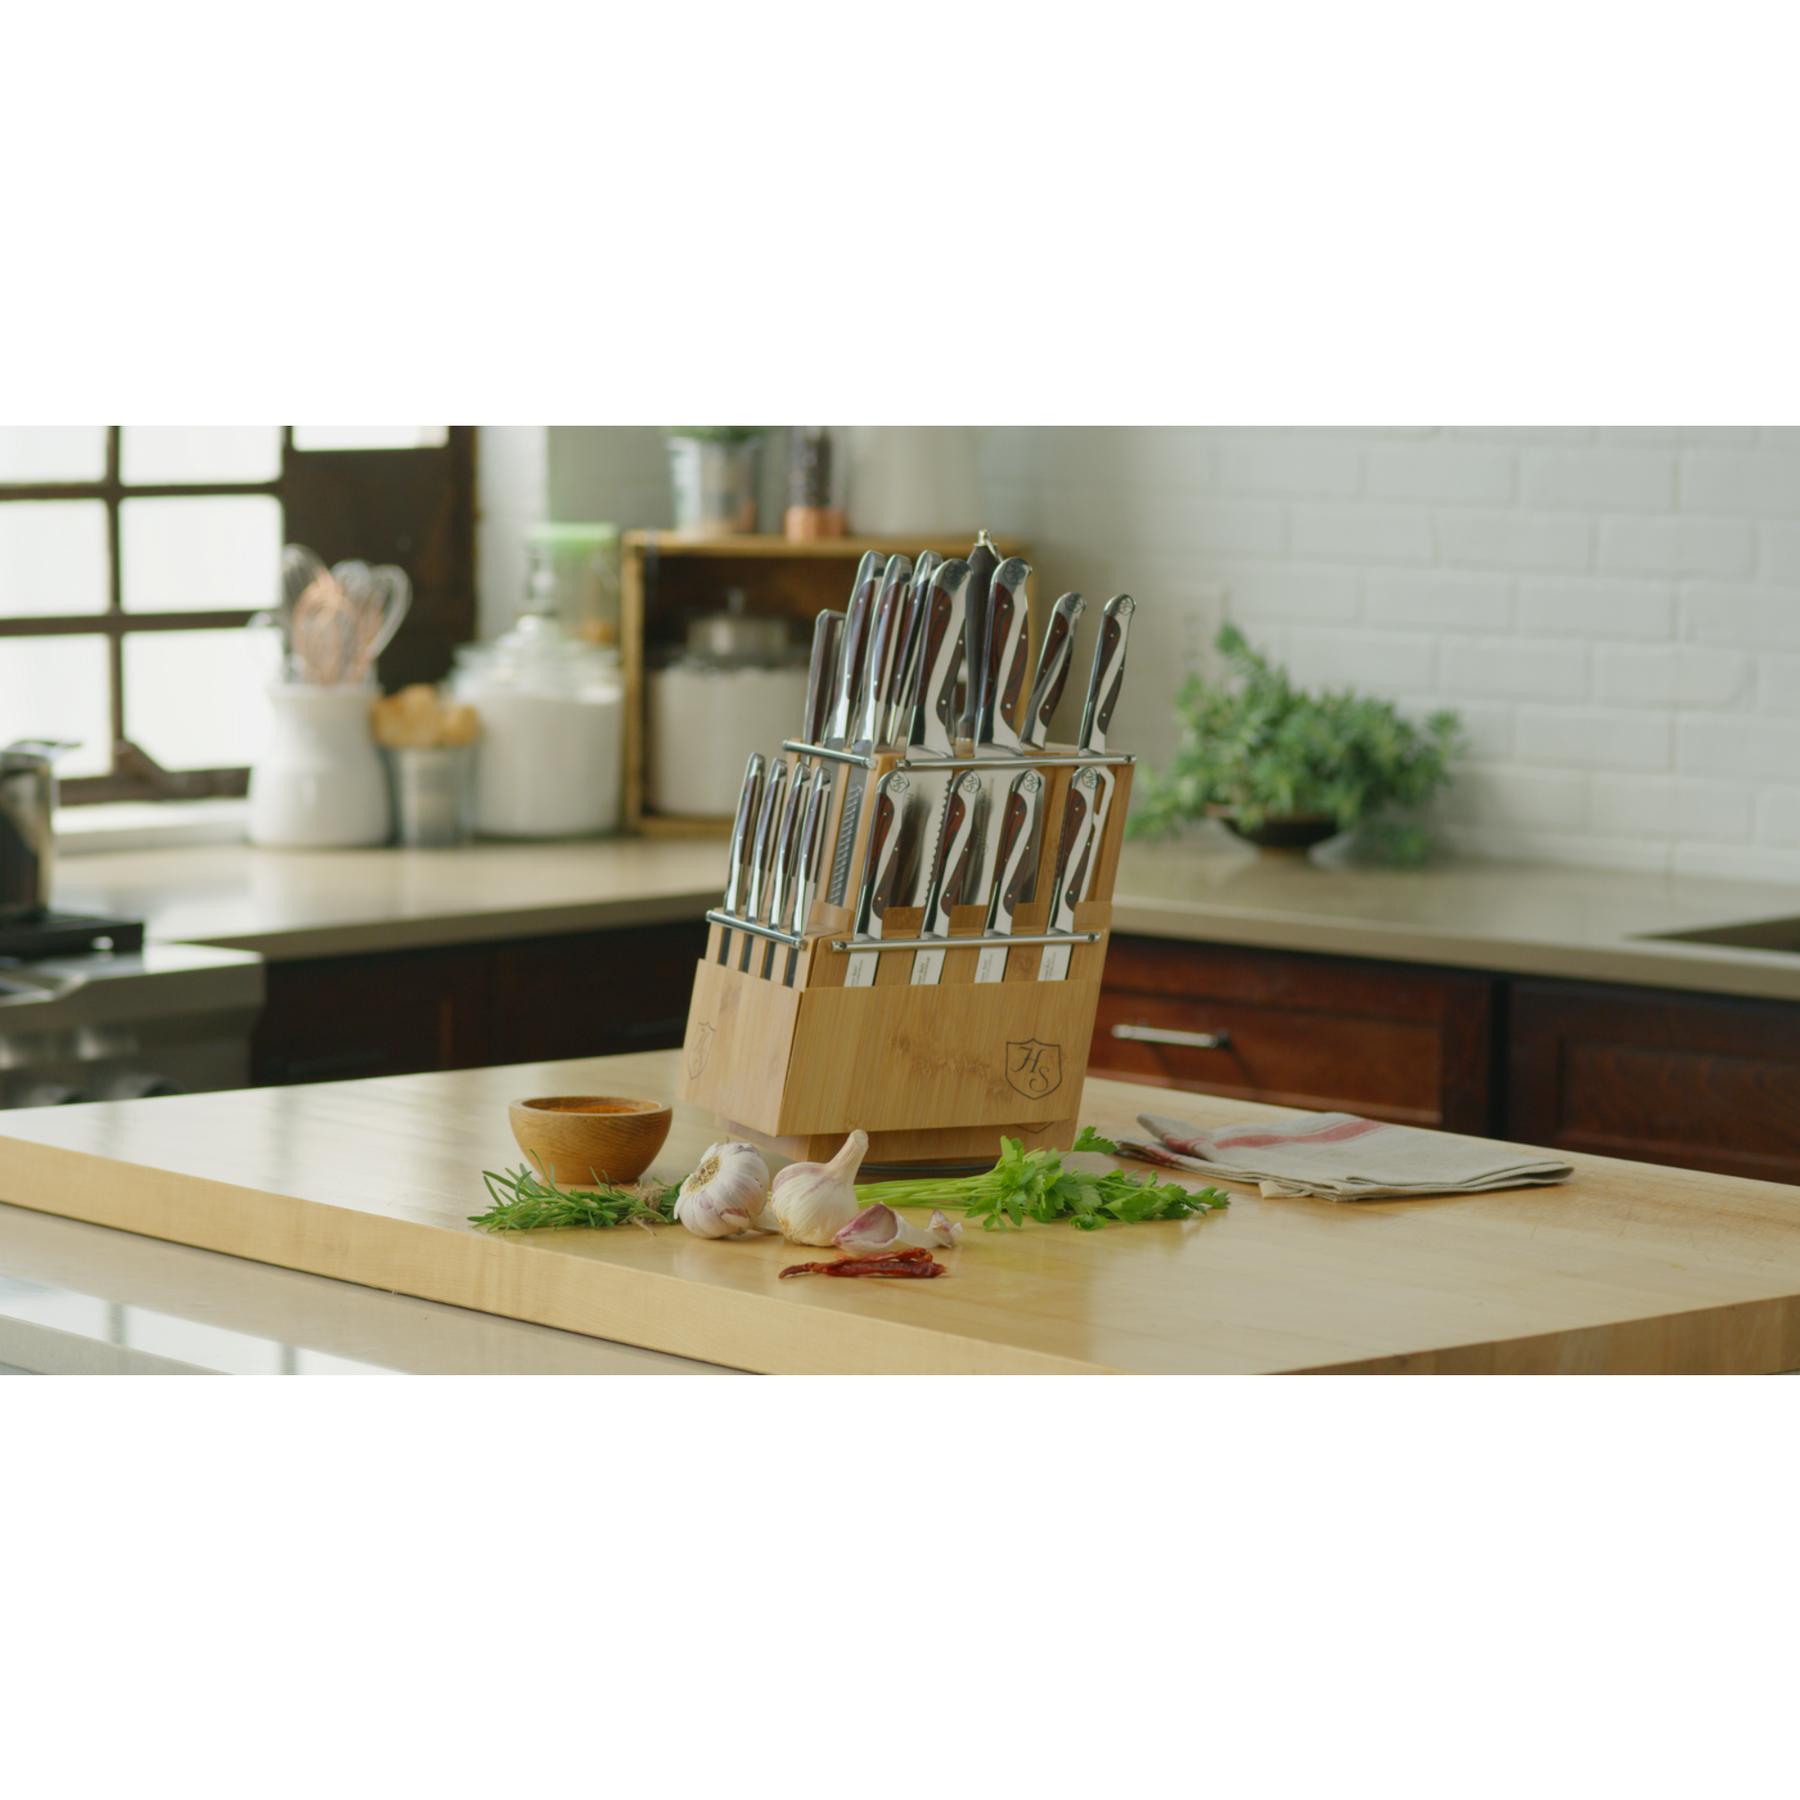 Large Chef's Knife - Knives Collection – CRISTEL USA